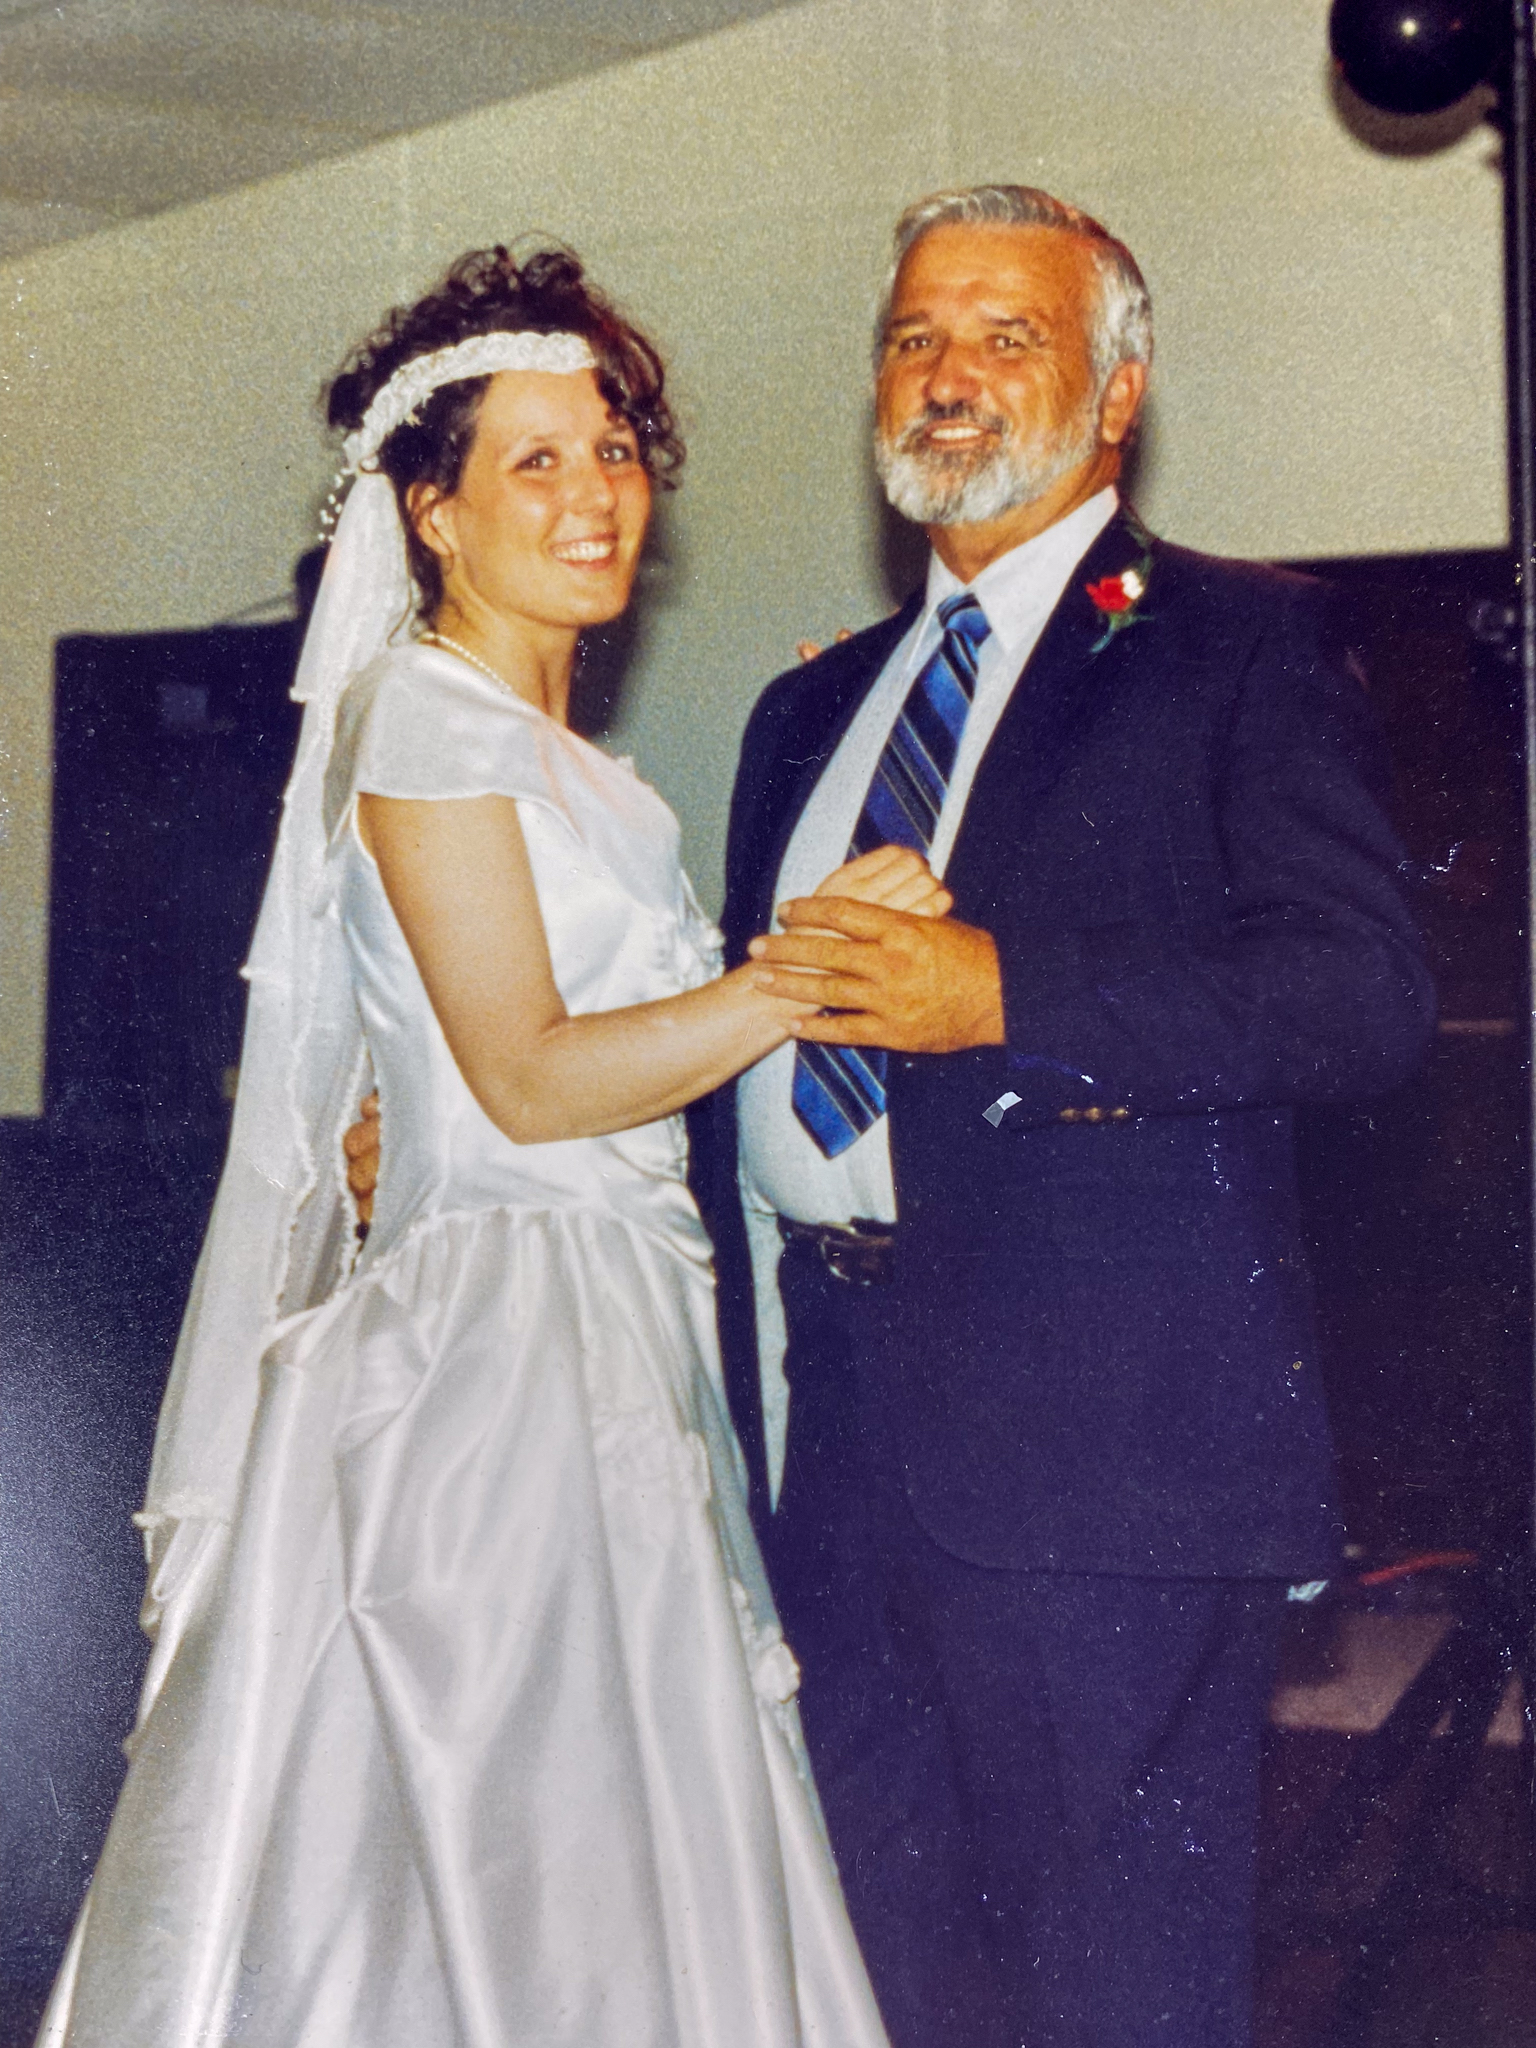 Submitted by Kim Hall. Victor Szatkowski dances with his daughter Linda Mac Neill on her wedding day. 